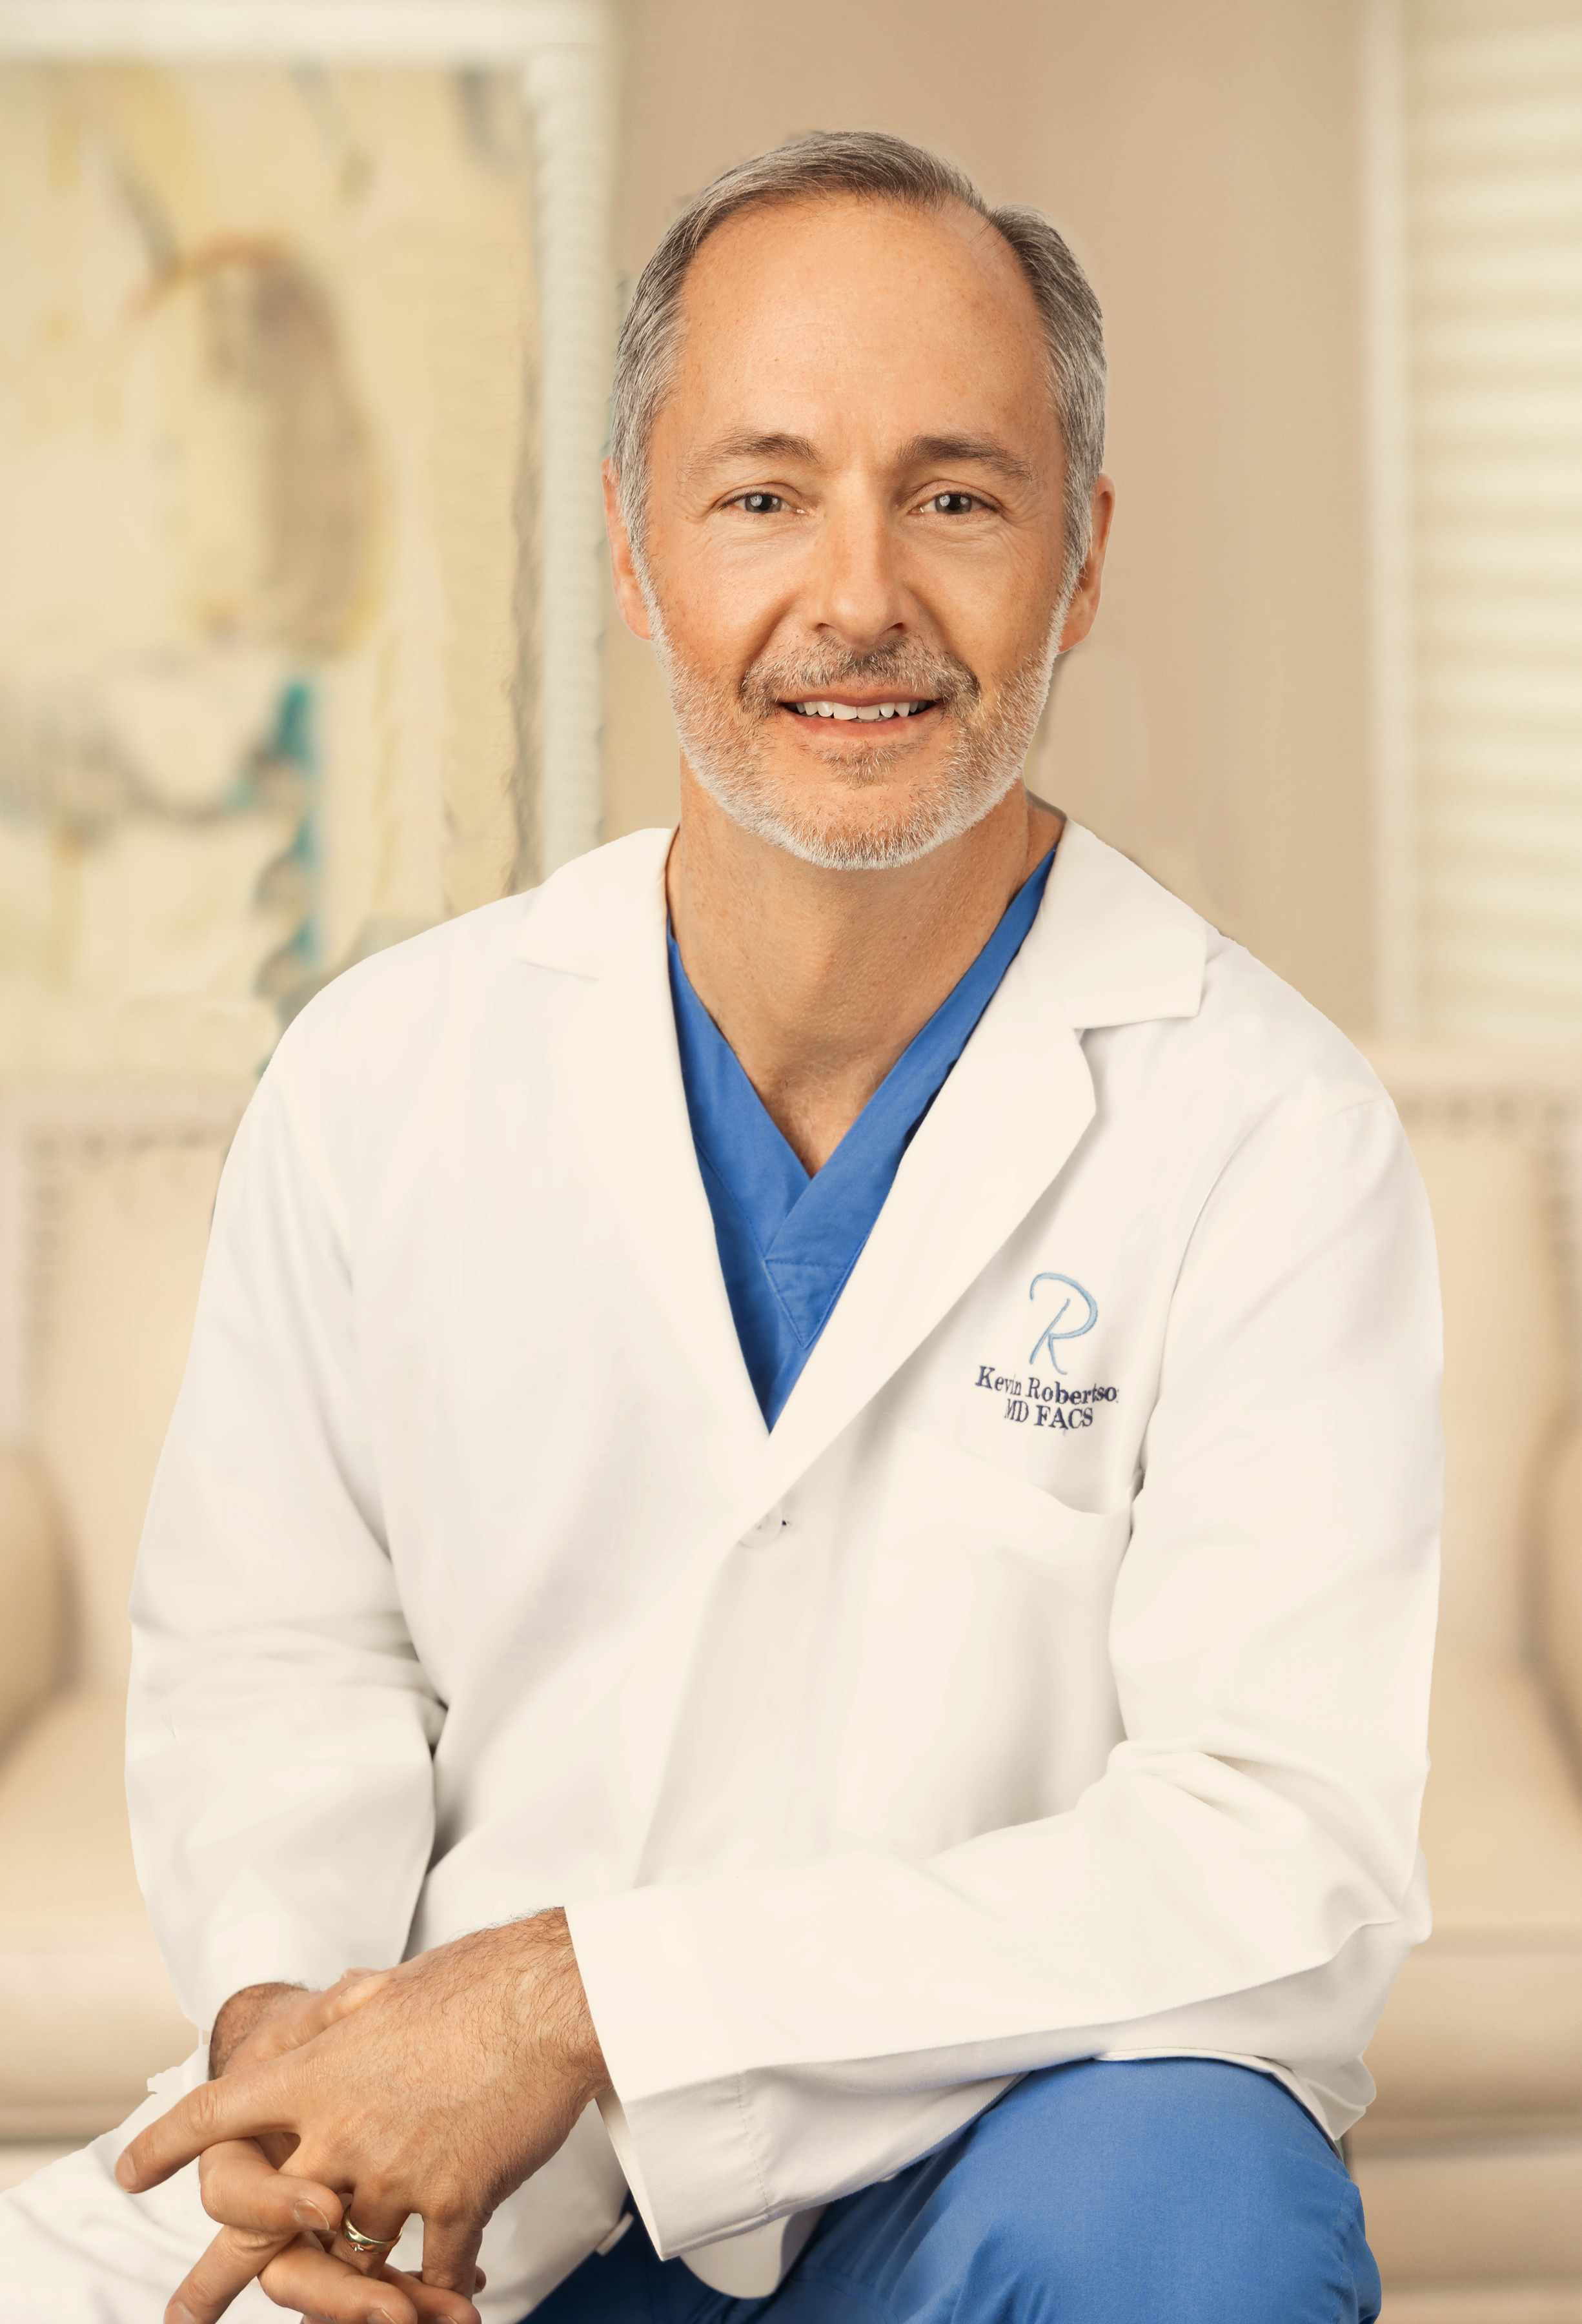 Dr Robertson is the medical director for ReFresh Aesthetic Centers